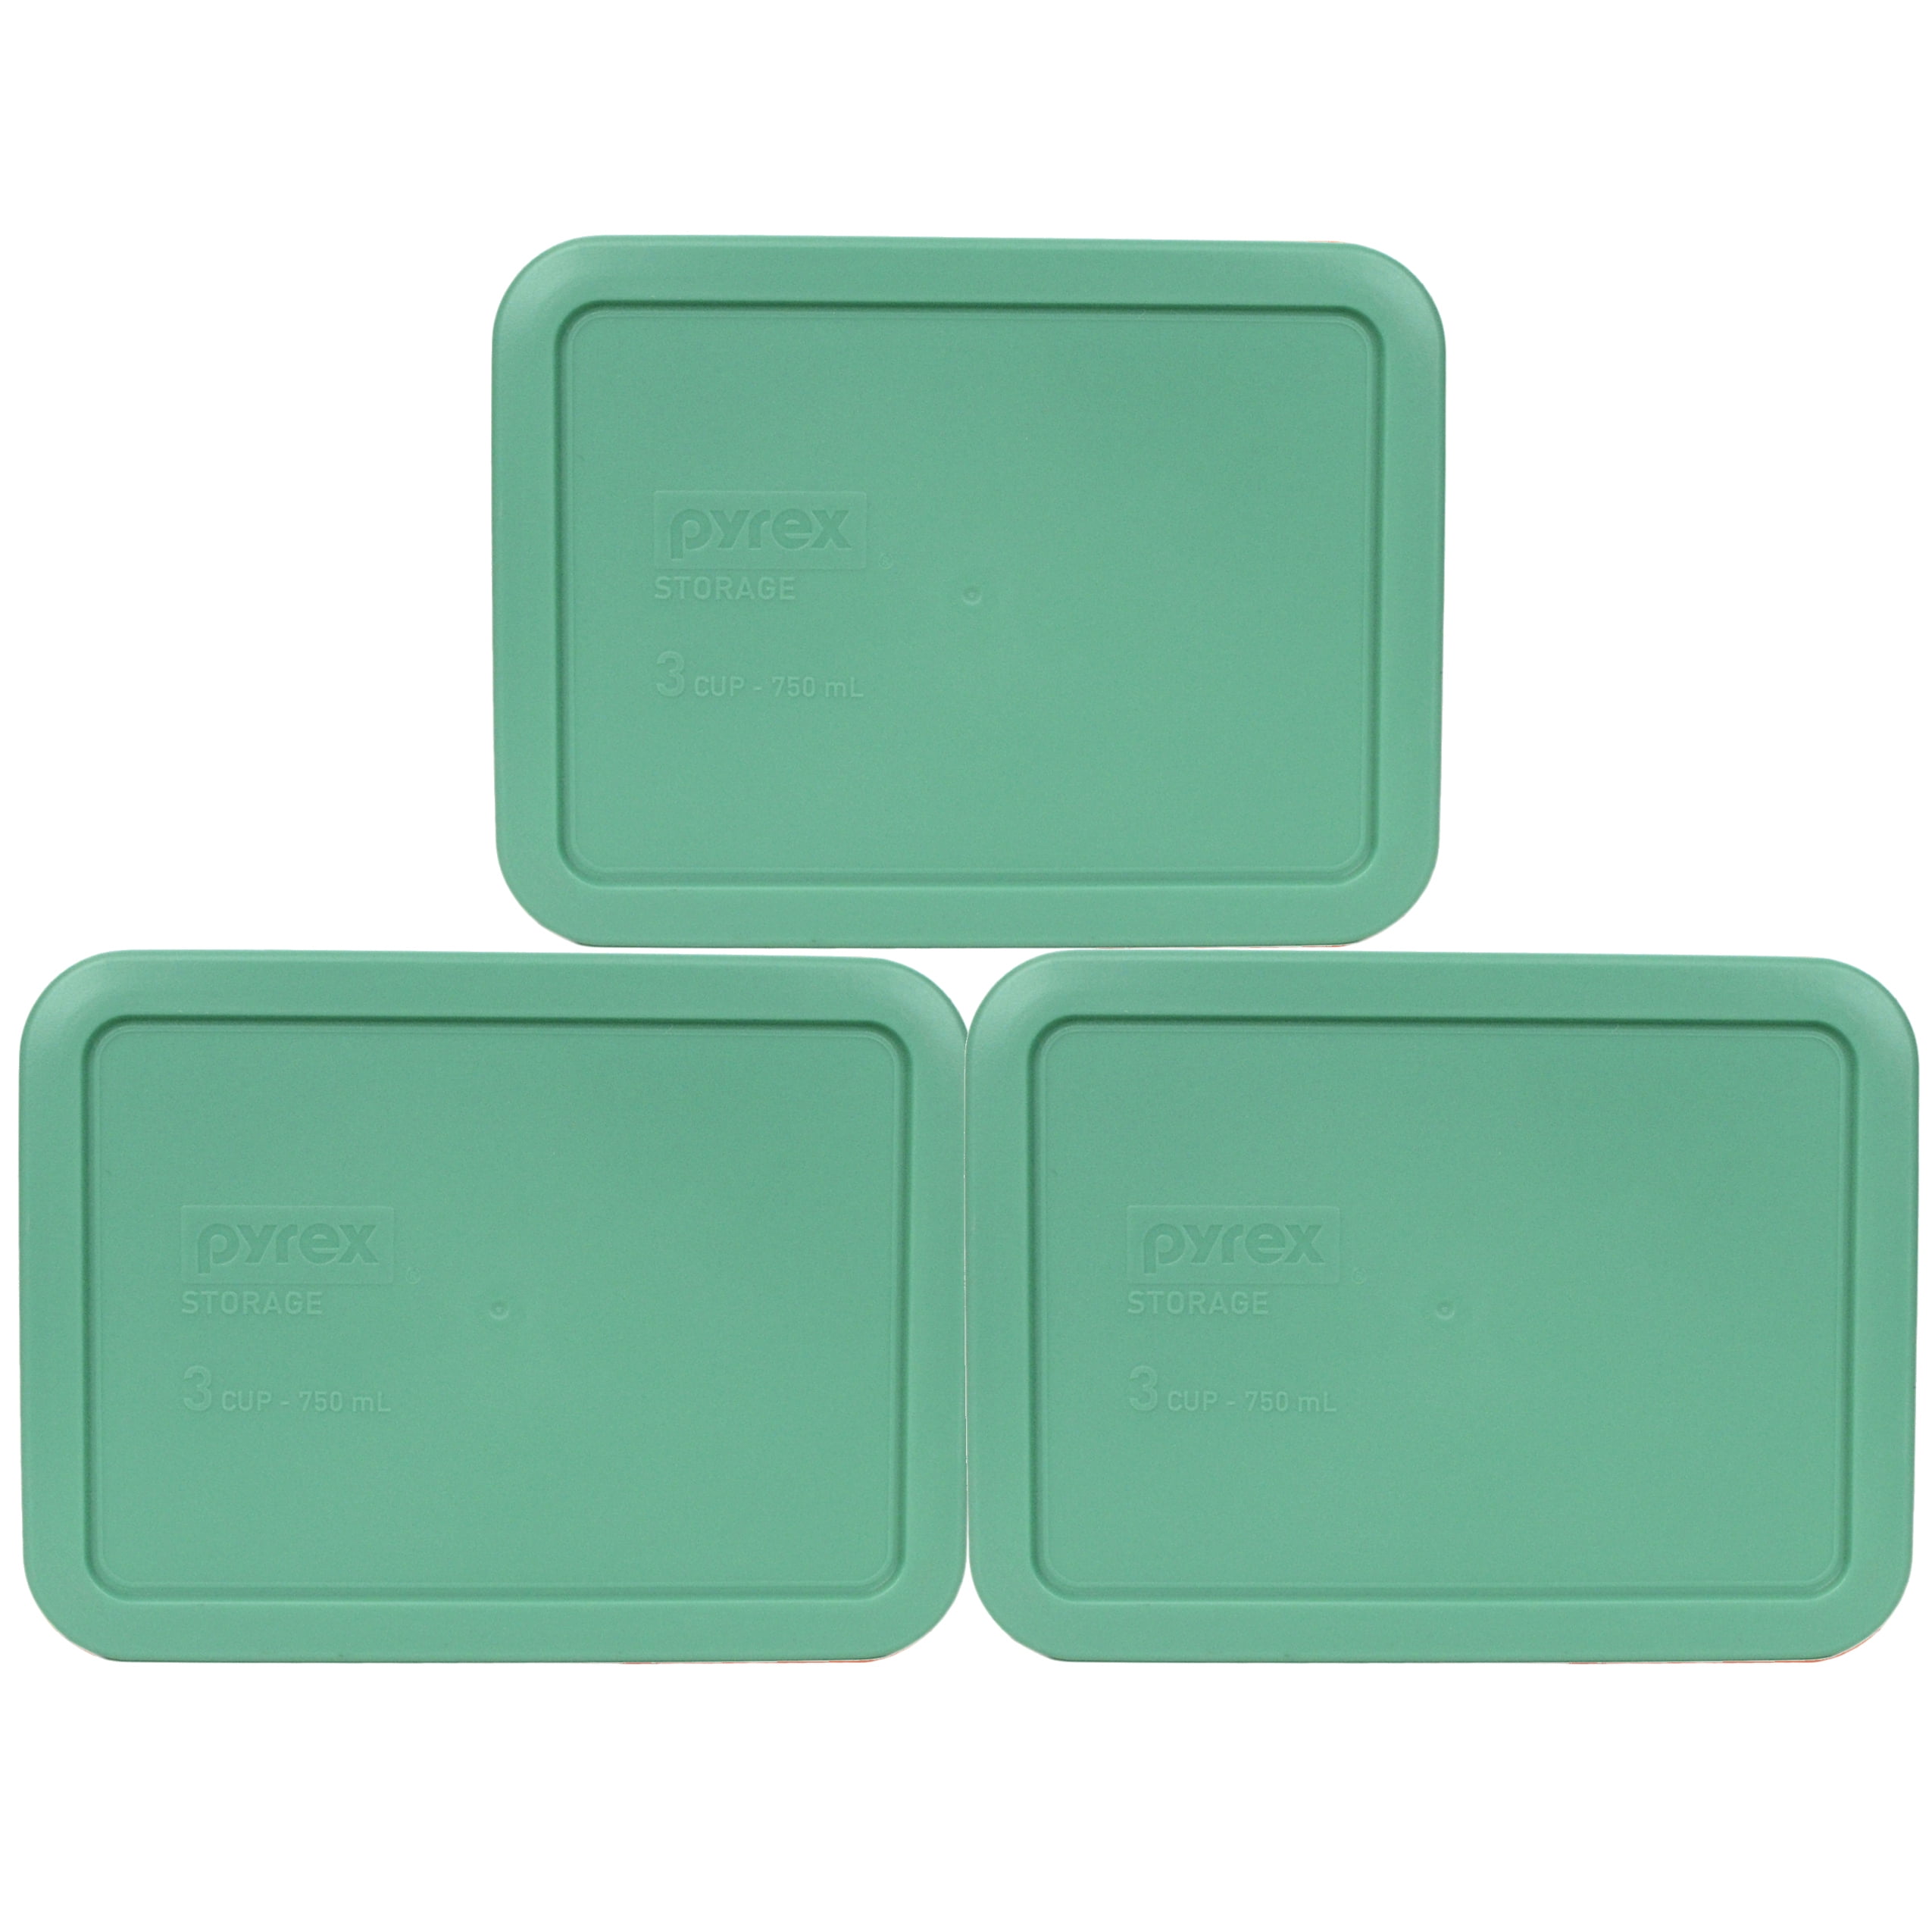 Pyrex 7210 3-Cup Glass Food Storage Dishes w/ 7210-PC Light Green Lids (2-Pack)